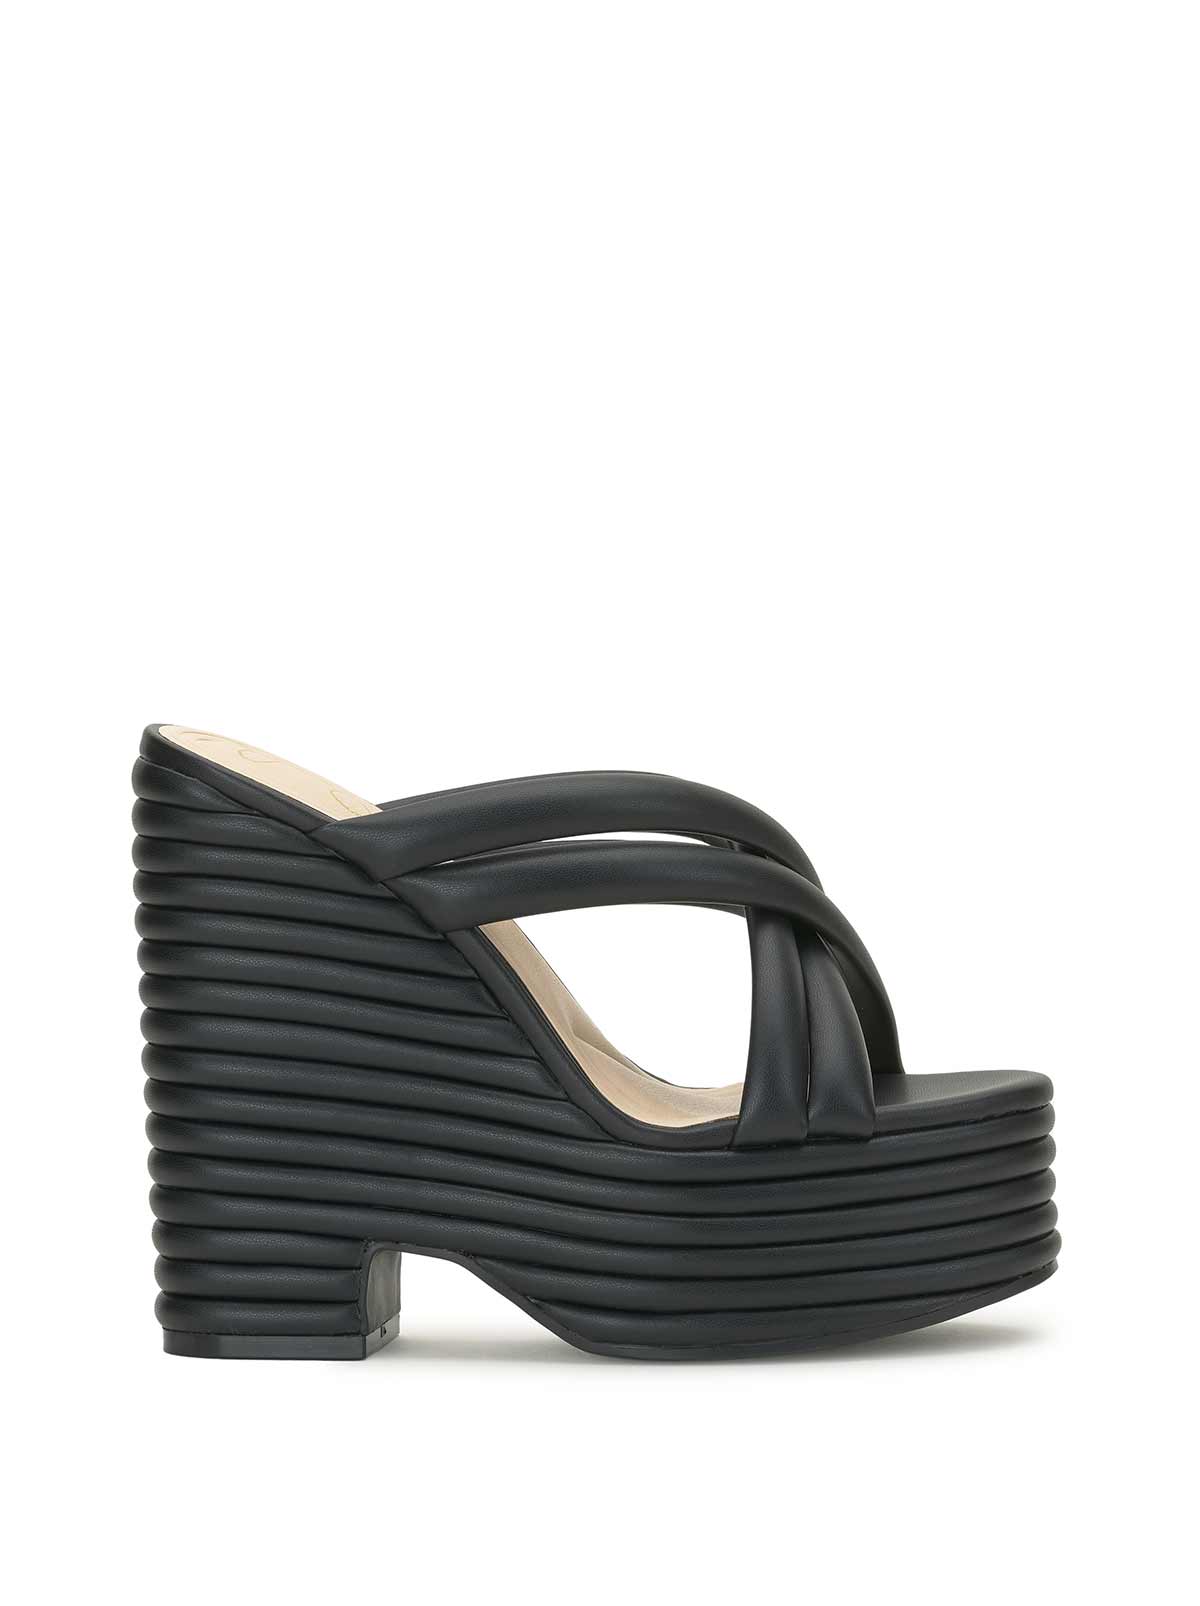 Image of Citali Platfrom Wedge in Black